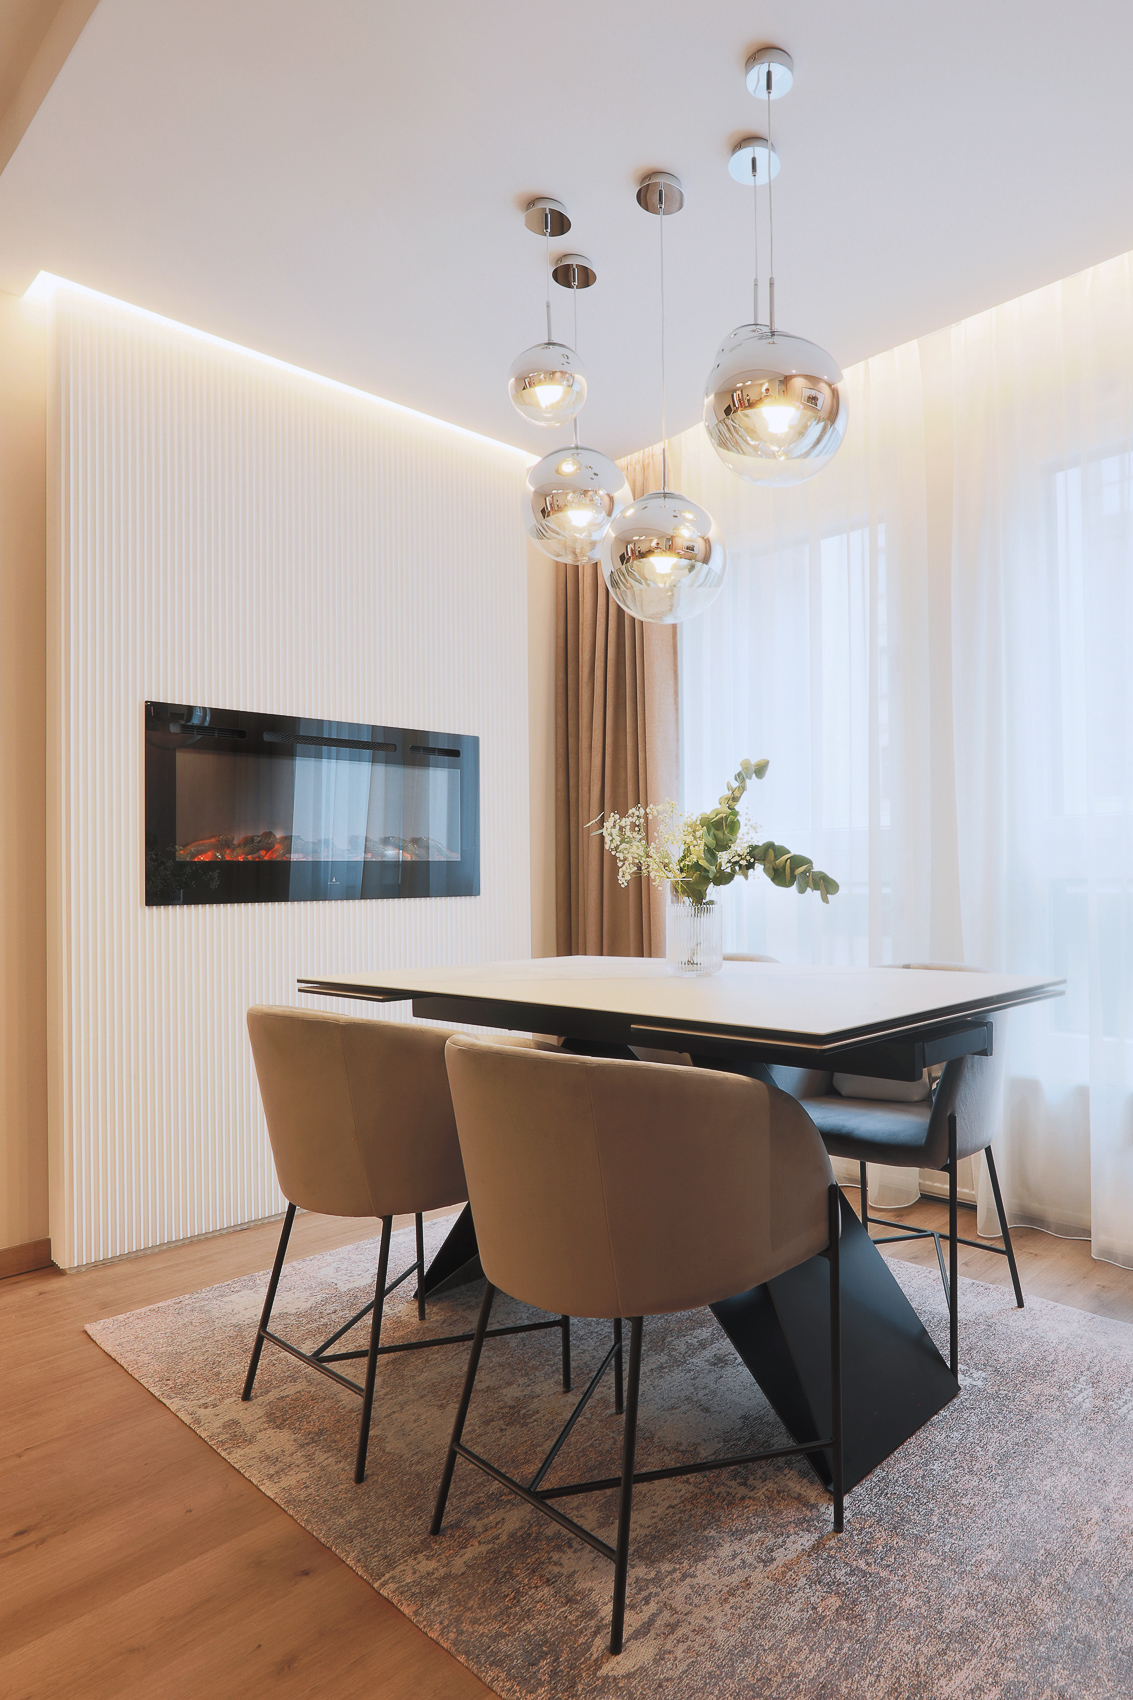 Interior photographer in Berlin, Prague for property owners when selling or renting an apartment Hotels and hotels, restaurants and bars, entertainment and shopping centers For architects and designers